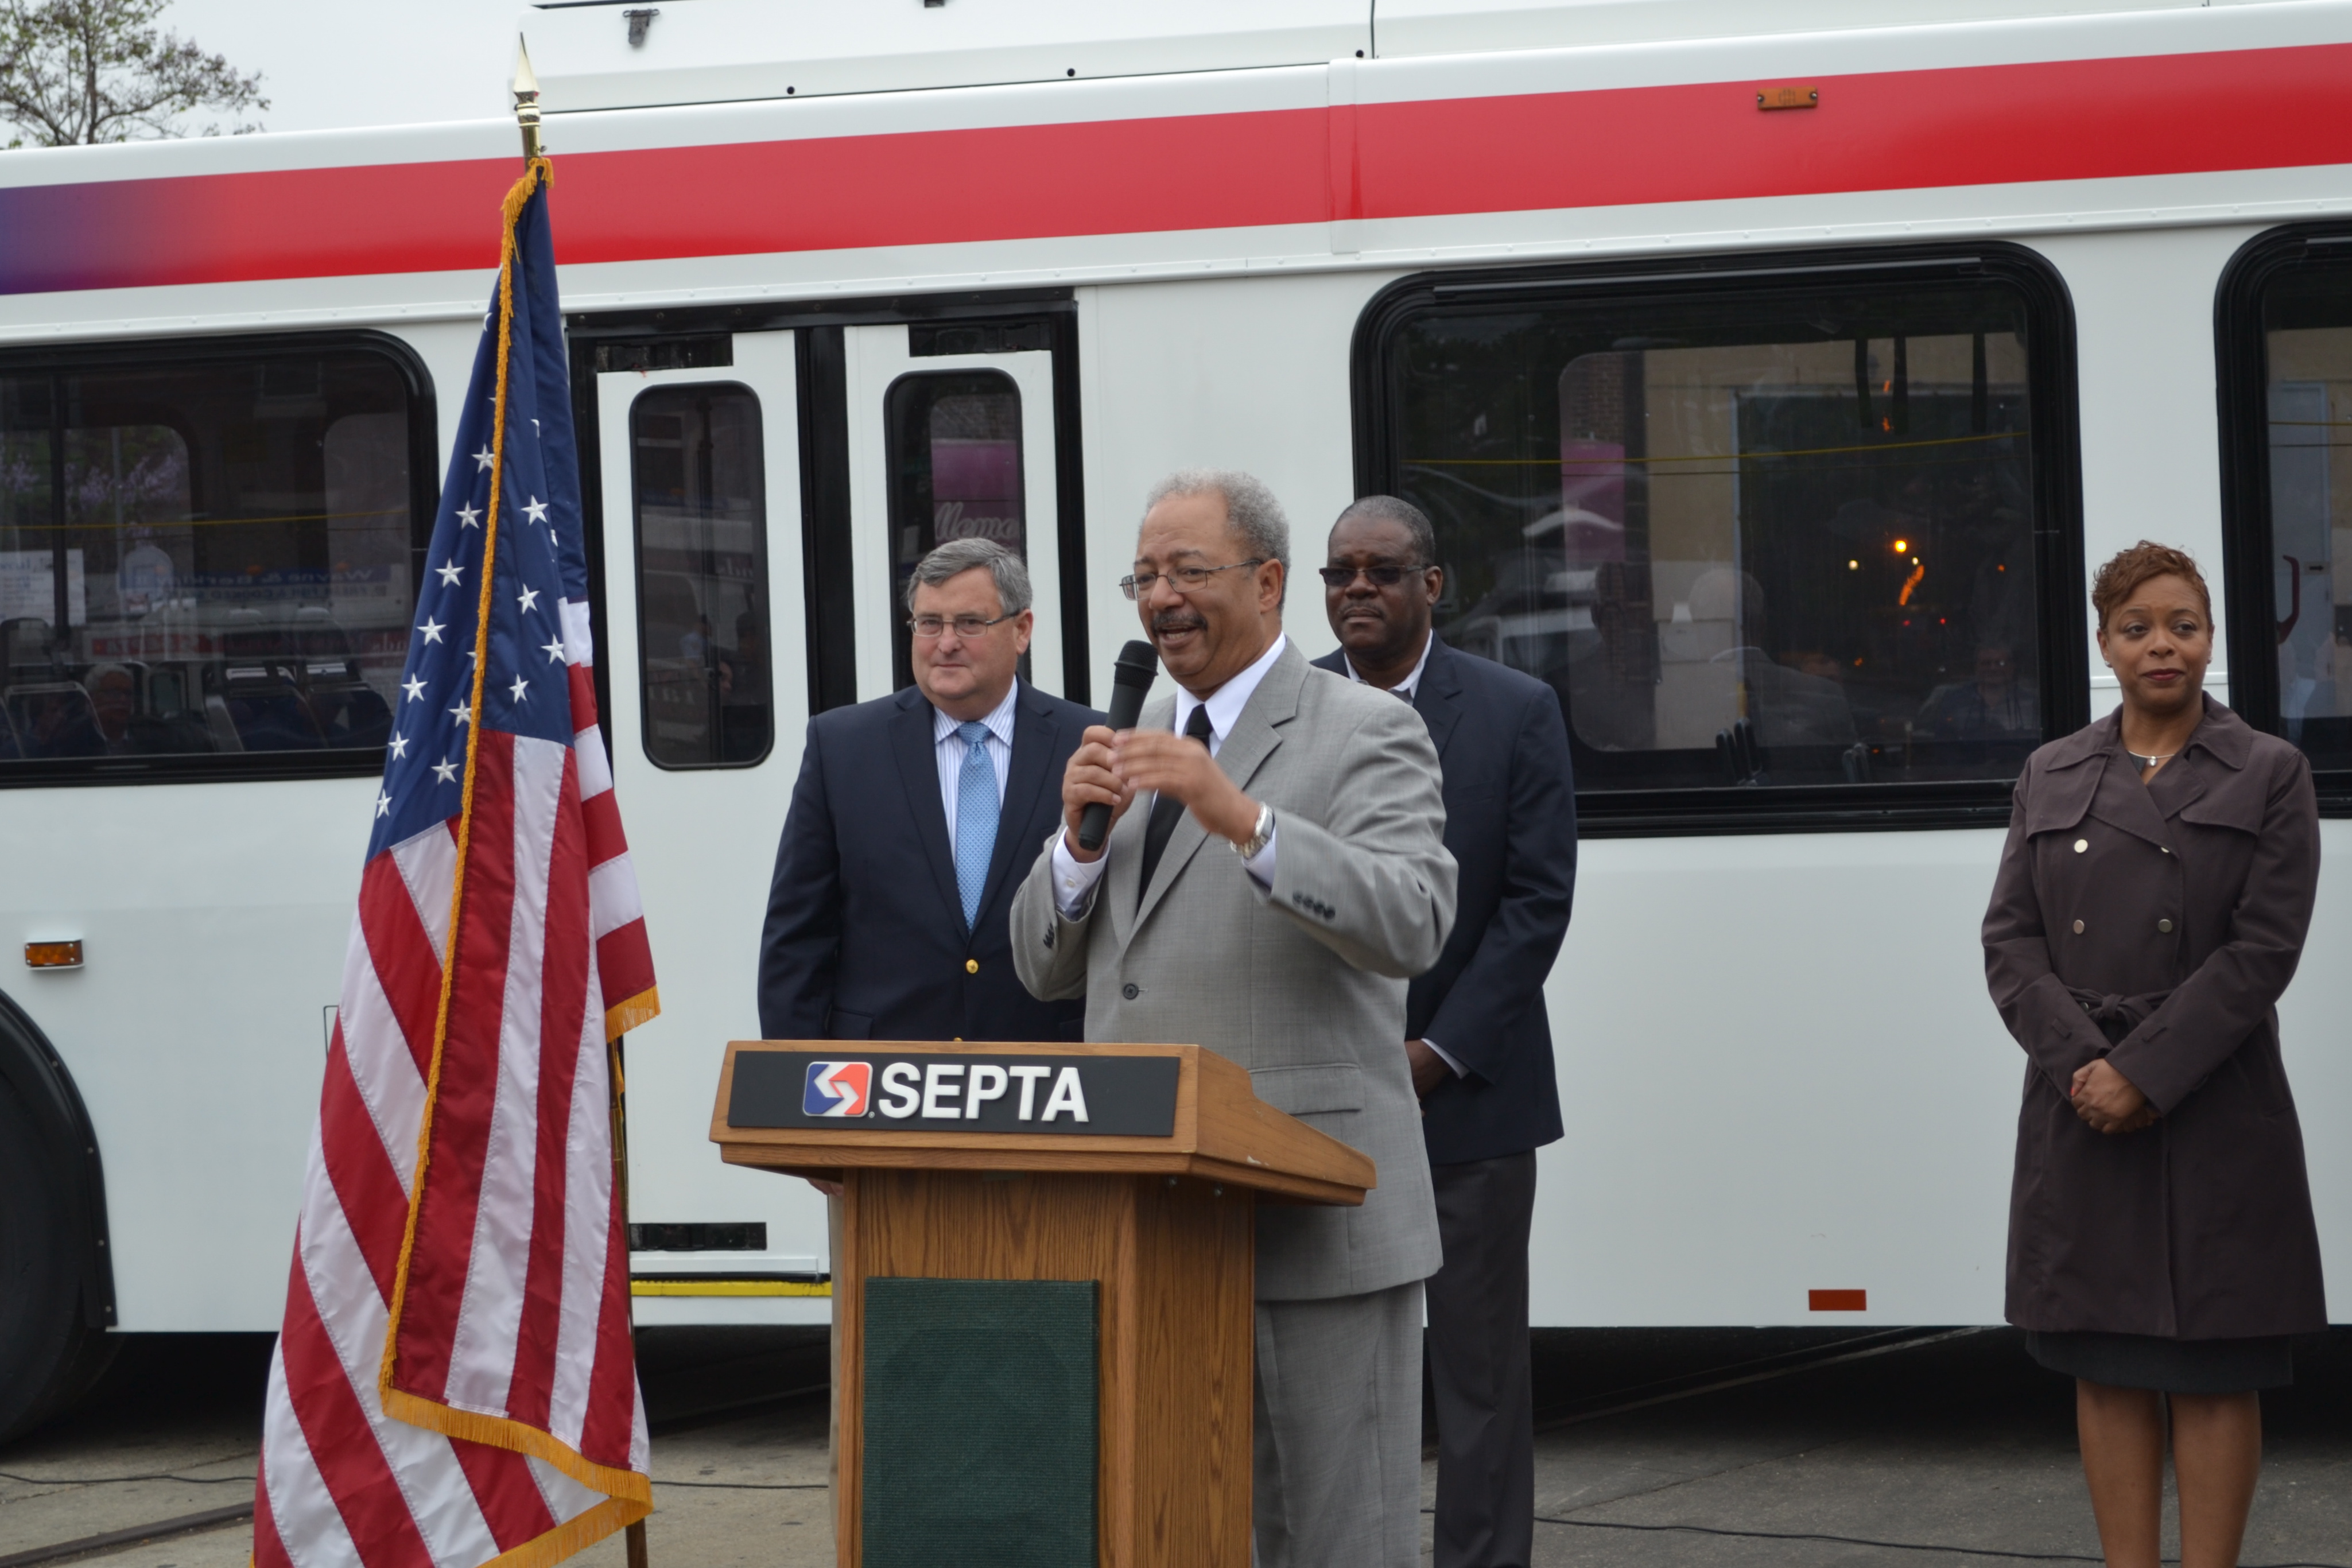 SEPTA officials thanked Congressman Chaka Fattah for securing the funding that made this and the 33rd and Dauphin Bus Loop possible